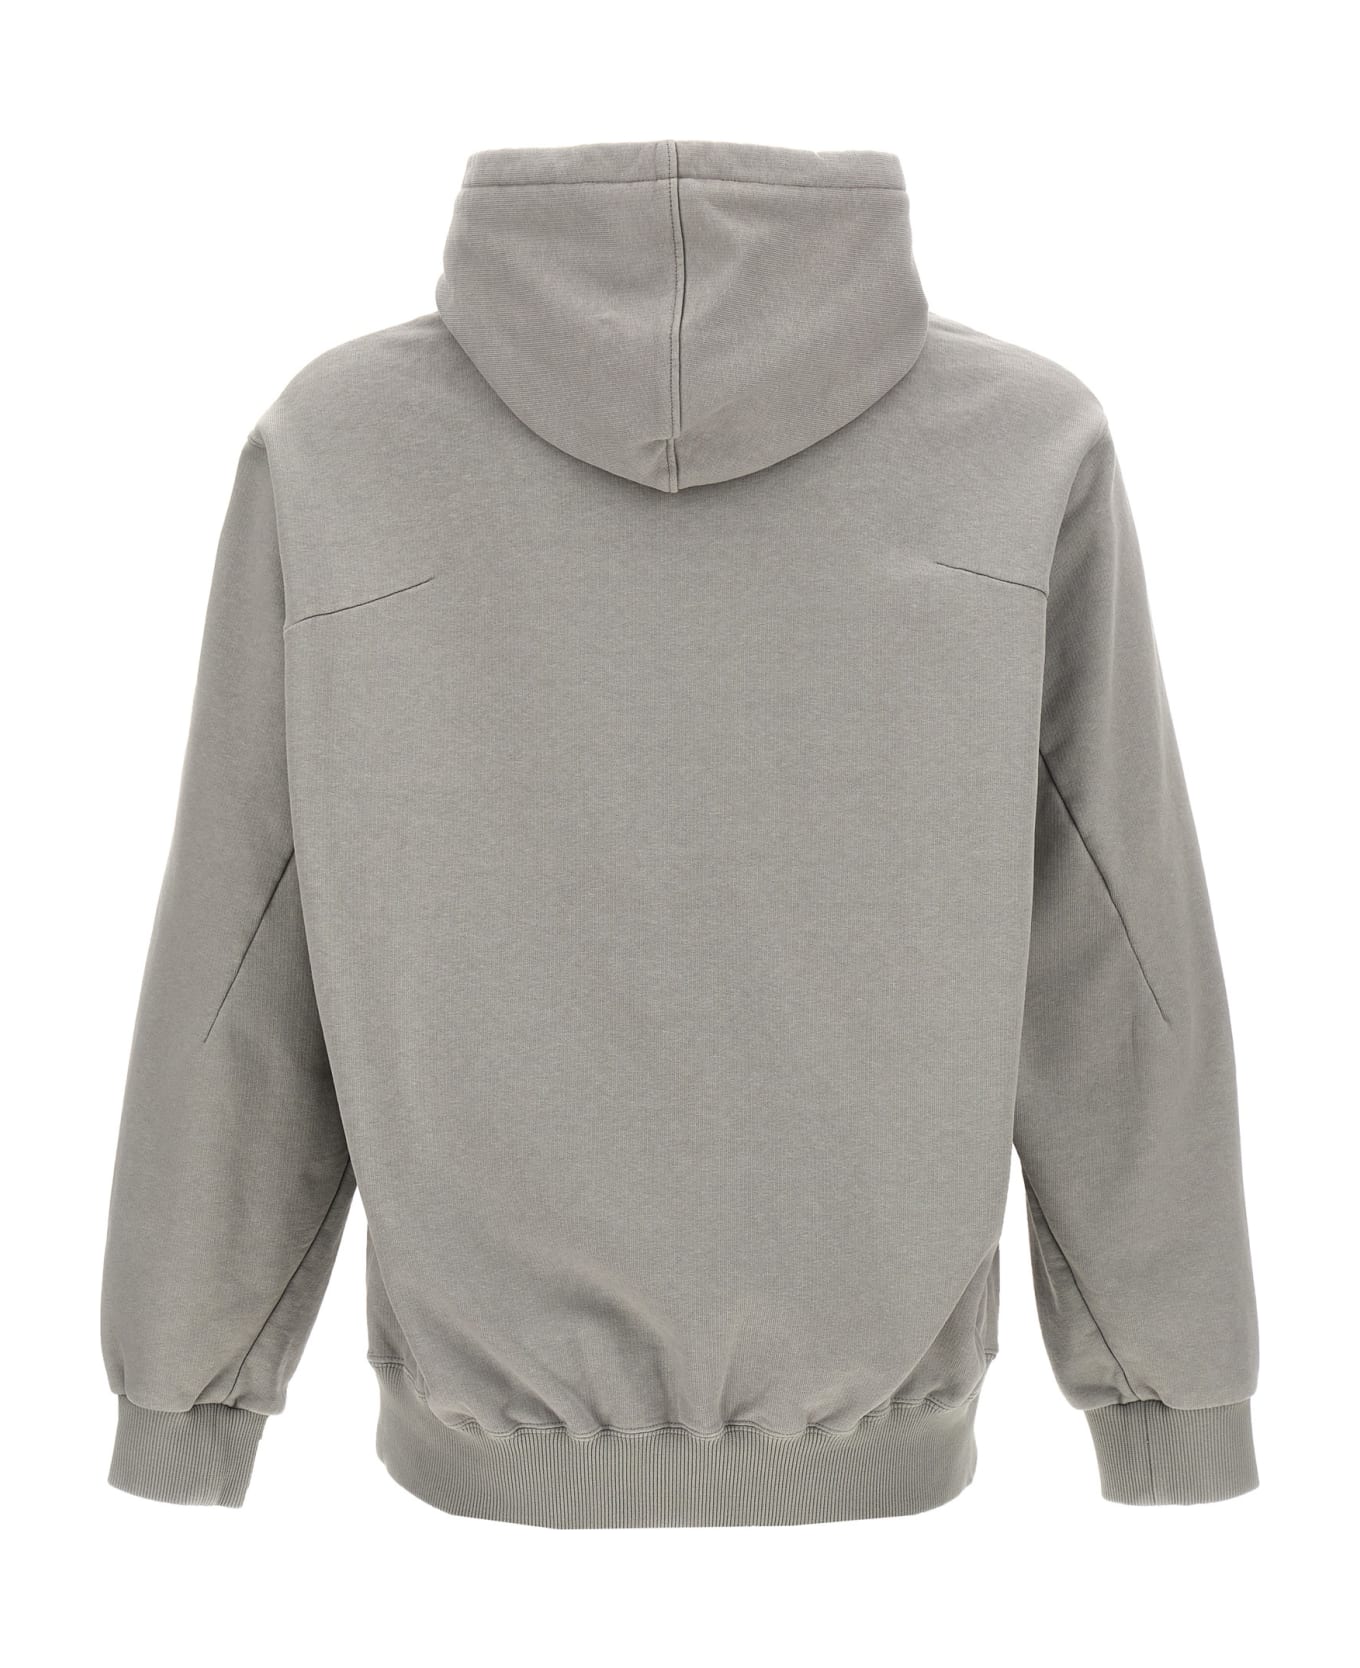 doublet 'cd-r Embroidery' Hoodie - Gray